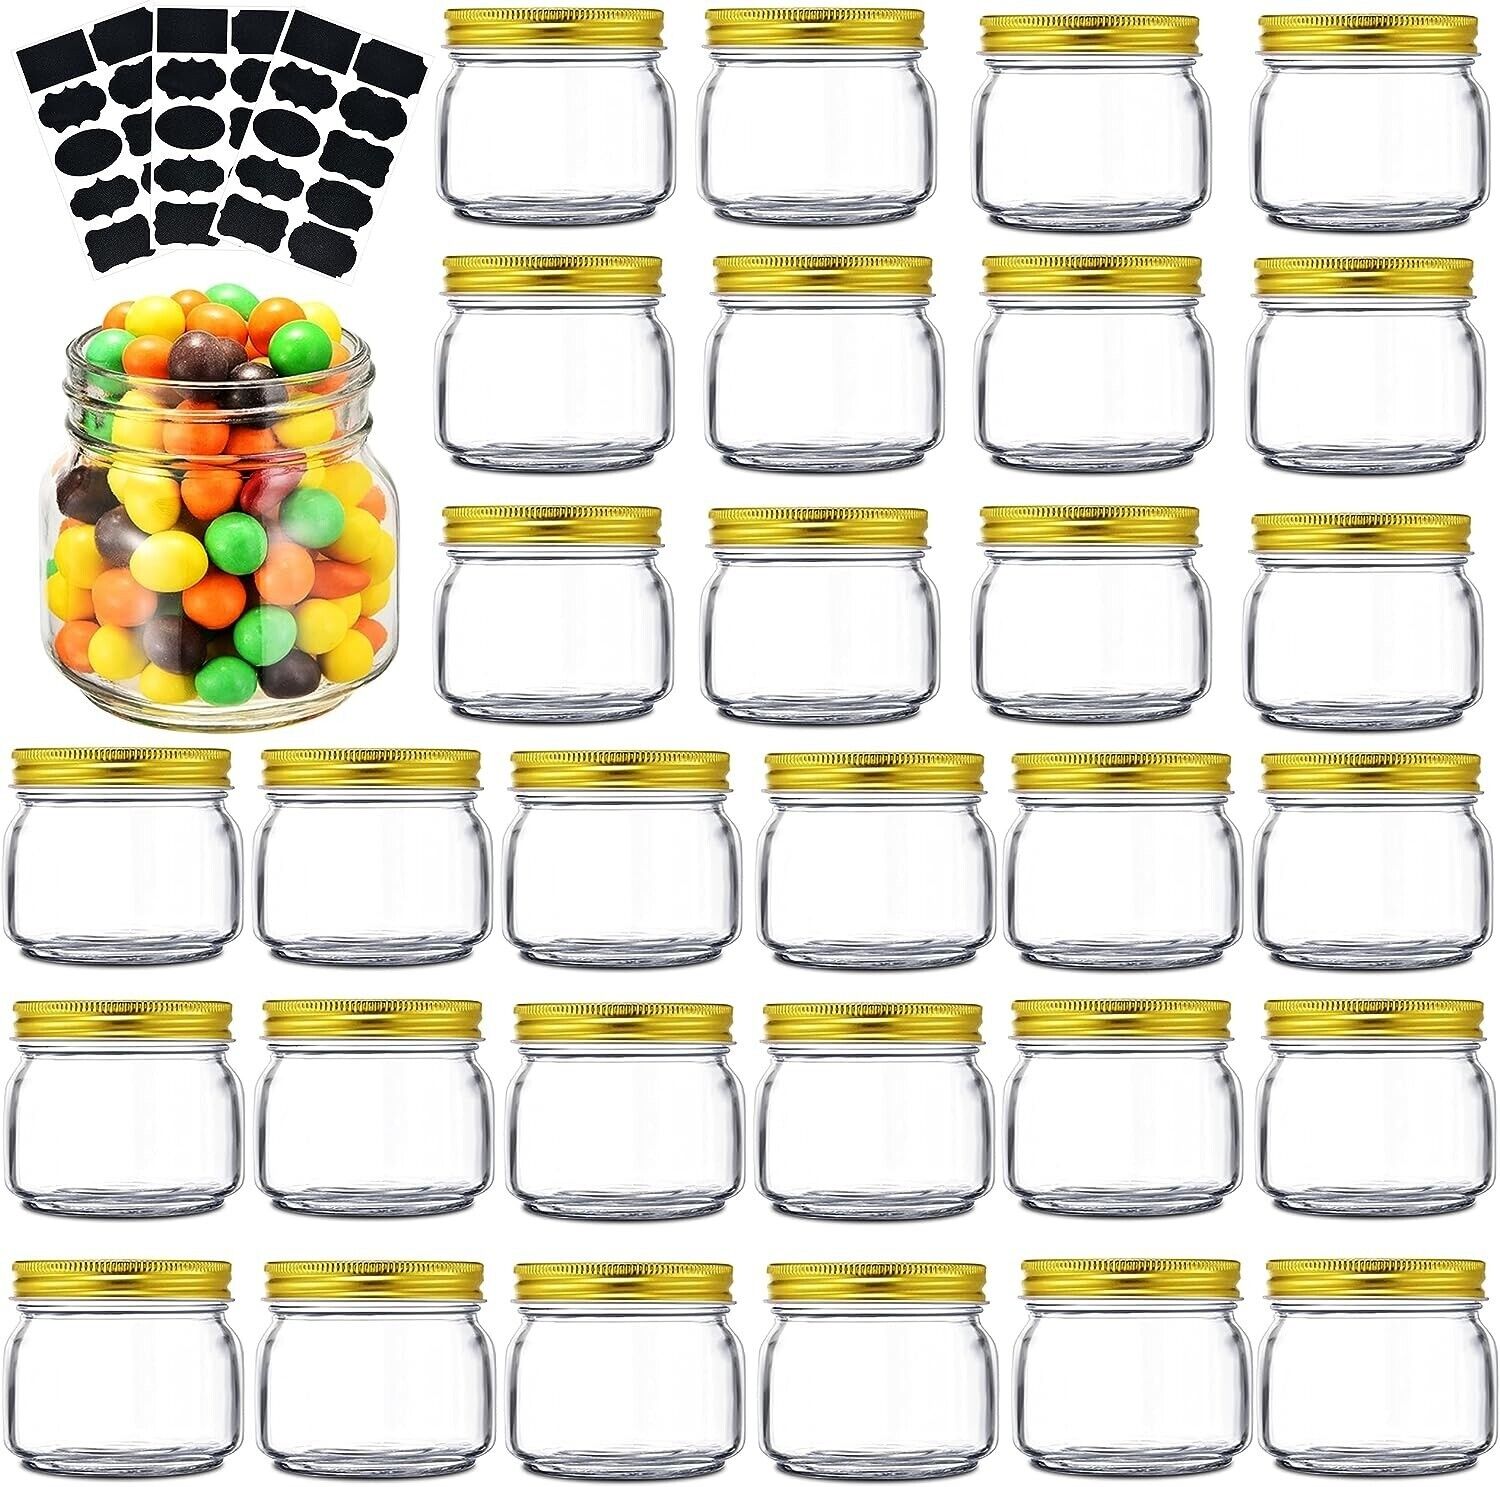 Mason Jars 8 oz - 30 Pack with Gold Lids for Canning - L6.81 & L8.5